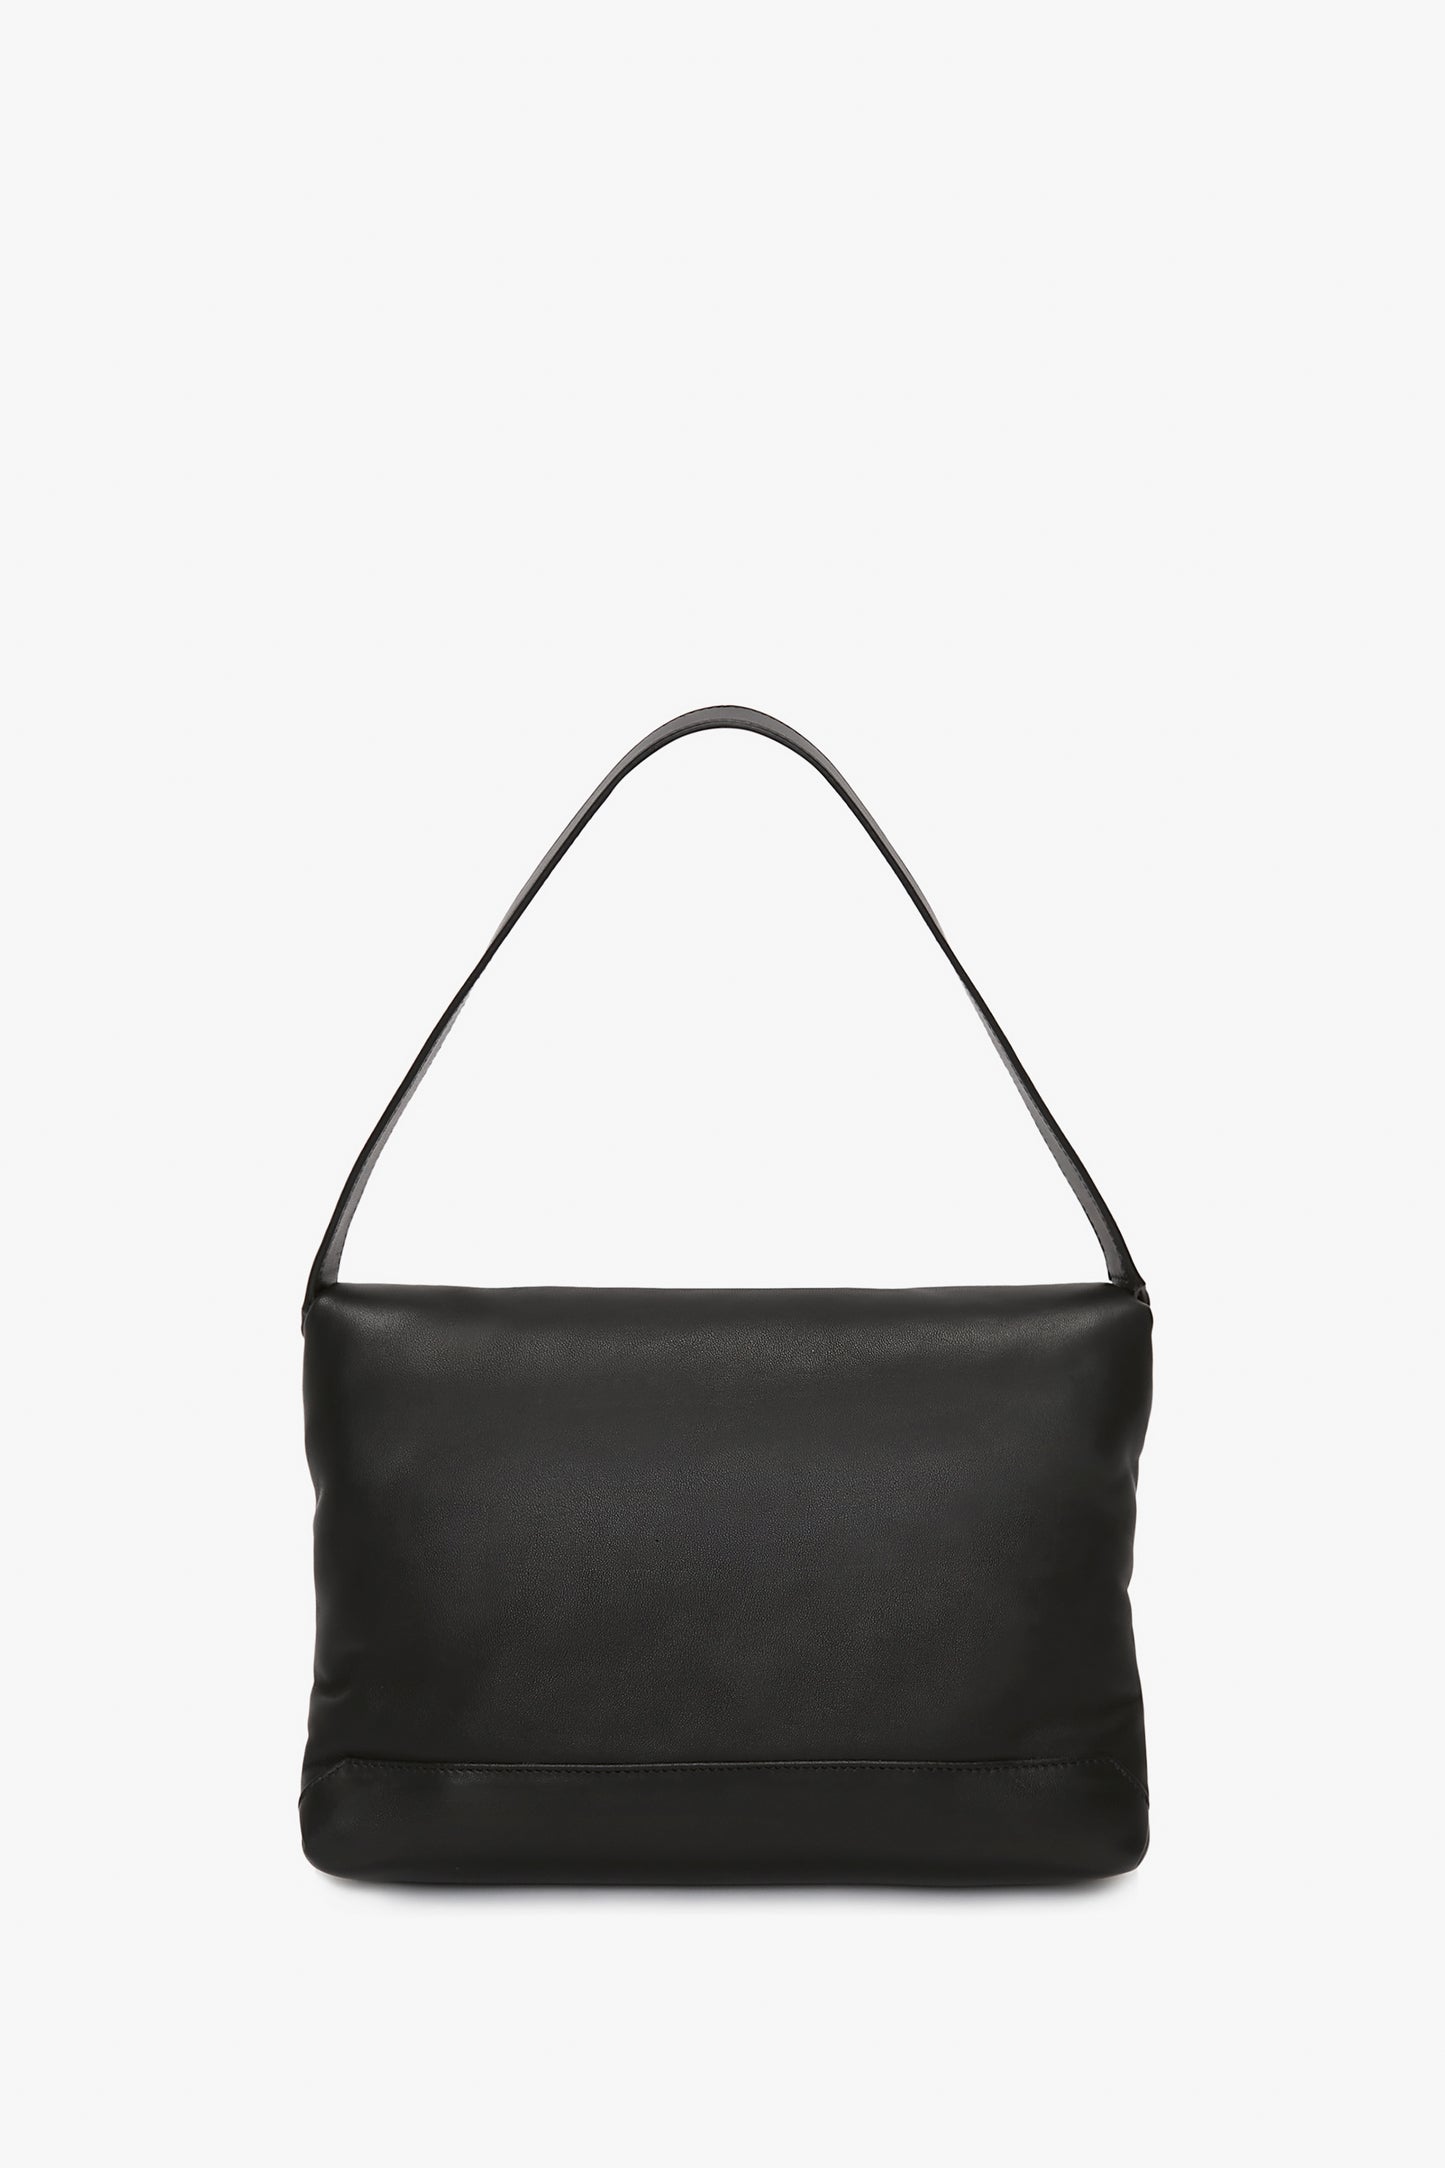 Puffy Chain Pouch With Strap In Black Leather shoulder bag with a streamlined design and single strap, displayed on a white background by Victoria Beckham.